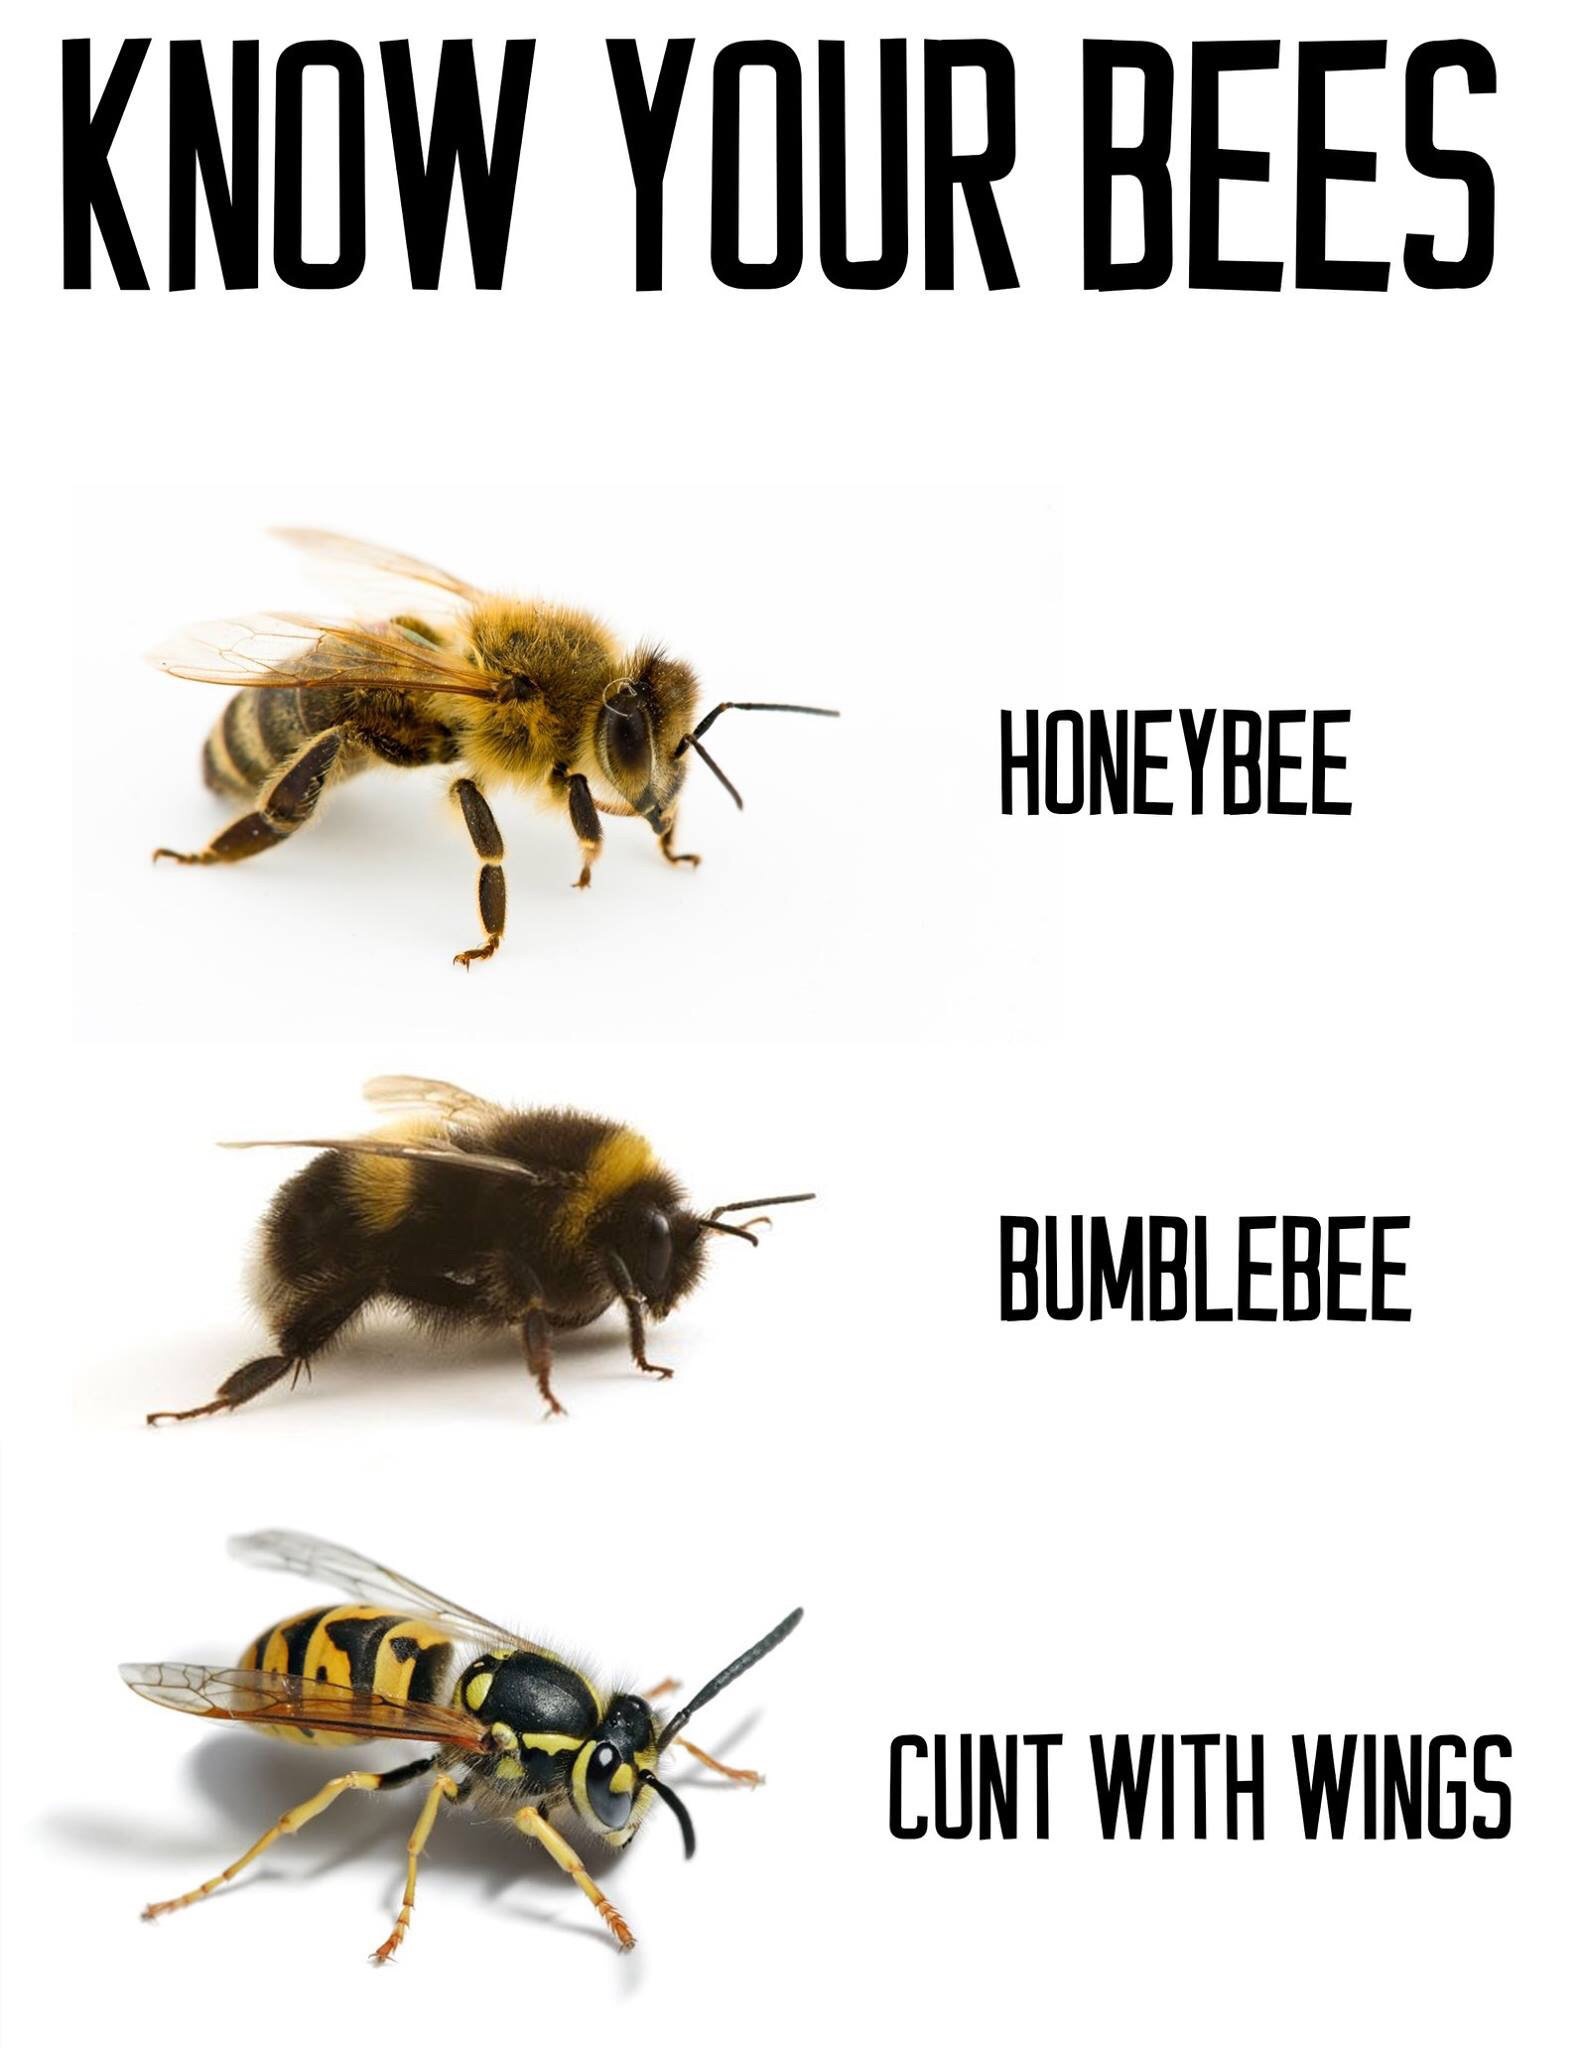 memes - bee memes - Know Your Bees Honeybee Bumblebee Cunt With Wings.